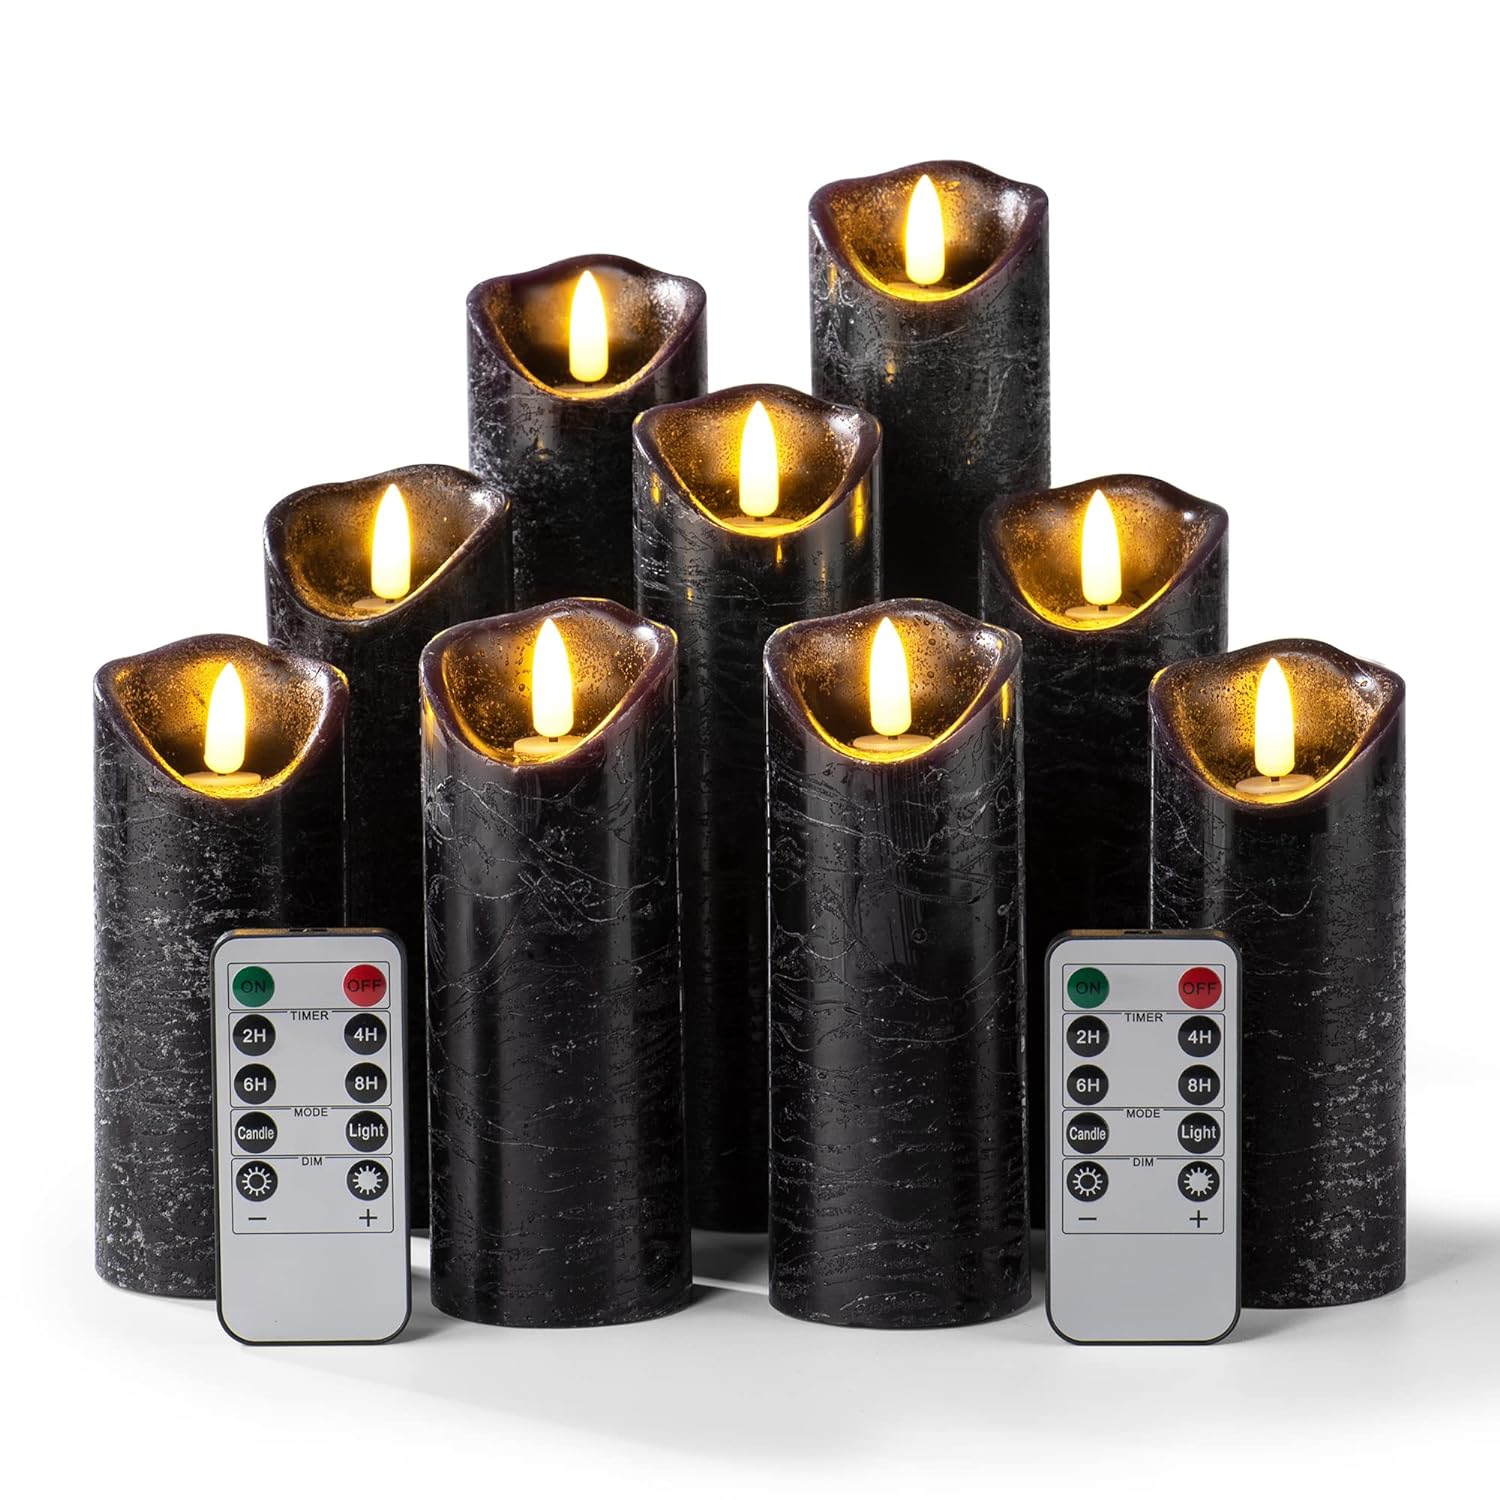 Set of 9 Flameless Candles Black Candles Battery Operated LED Real Wax Flickering Electric Candles with Remote Control Timer